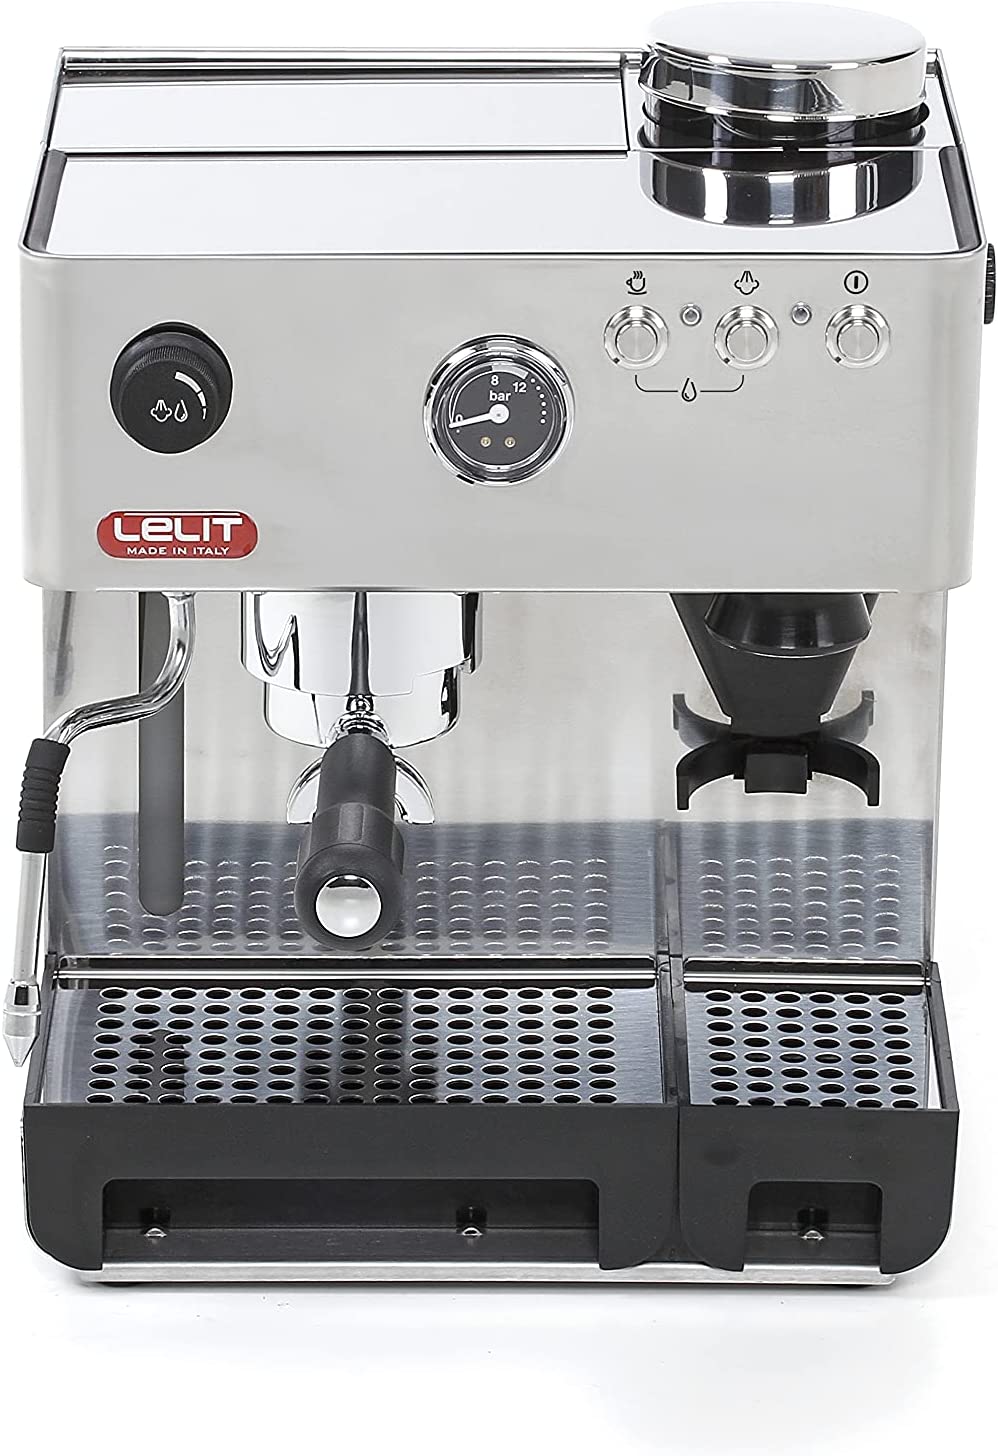 Lelit Anita PL042EMI Semi Professional Coffee Machine with Integrated Coffee Grinder, Ideal for Espresso Cover, Cappuccino and Coffee Pods, Stainless Steel Casing, Rustproof, 2.7 Litres